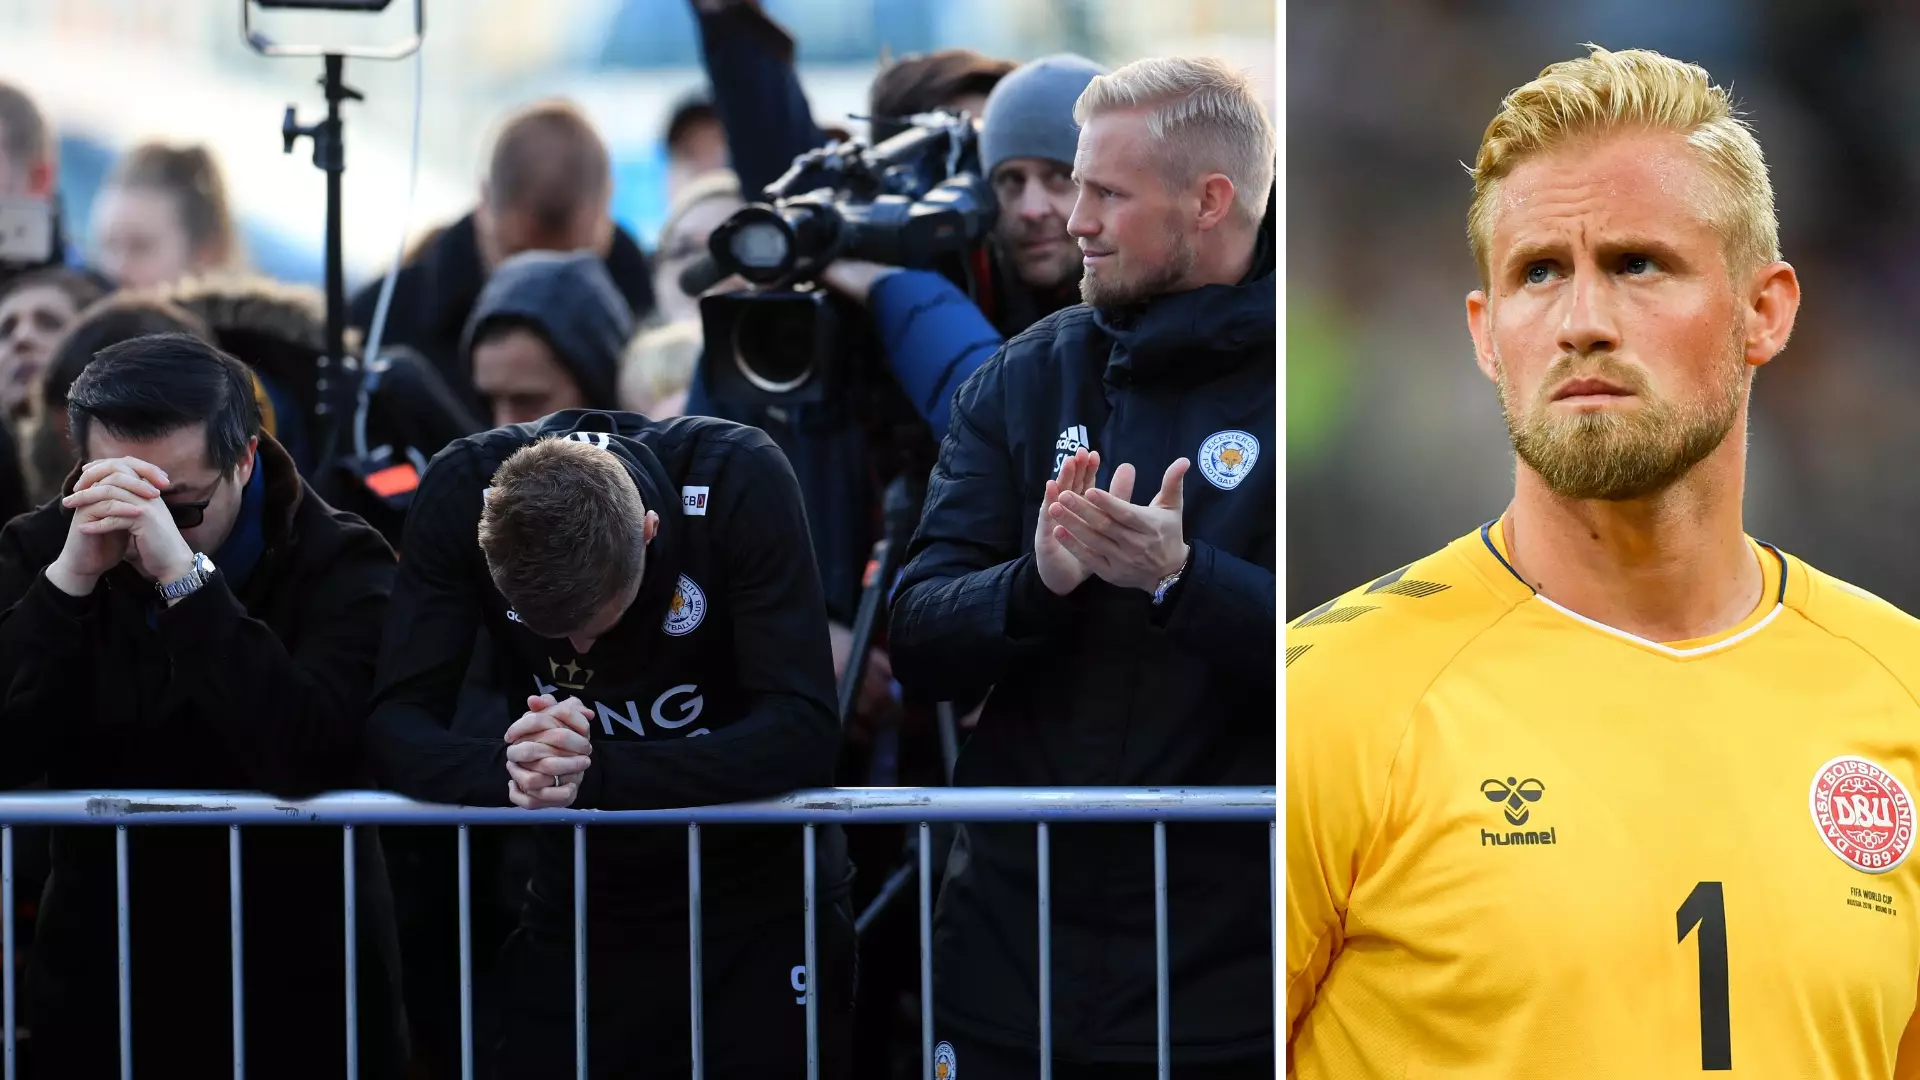 Kasper Schmeichel 'Saw Terrible Things' After He Rushed Out To Crashed Helicopter 